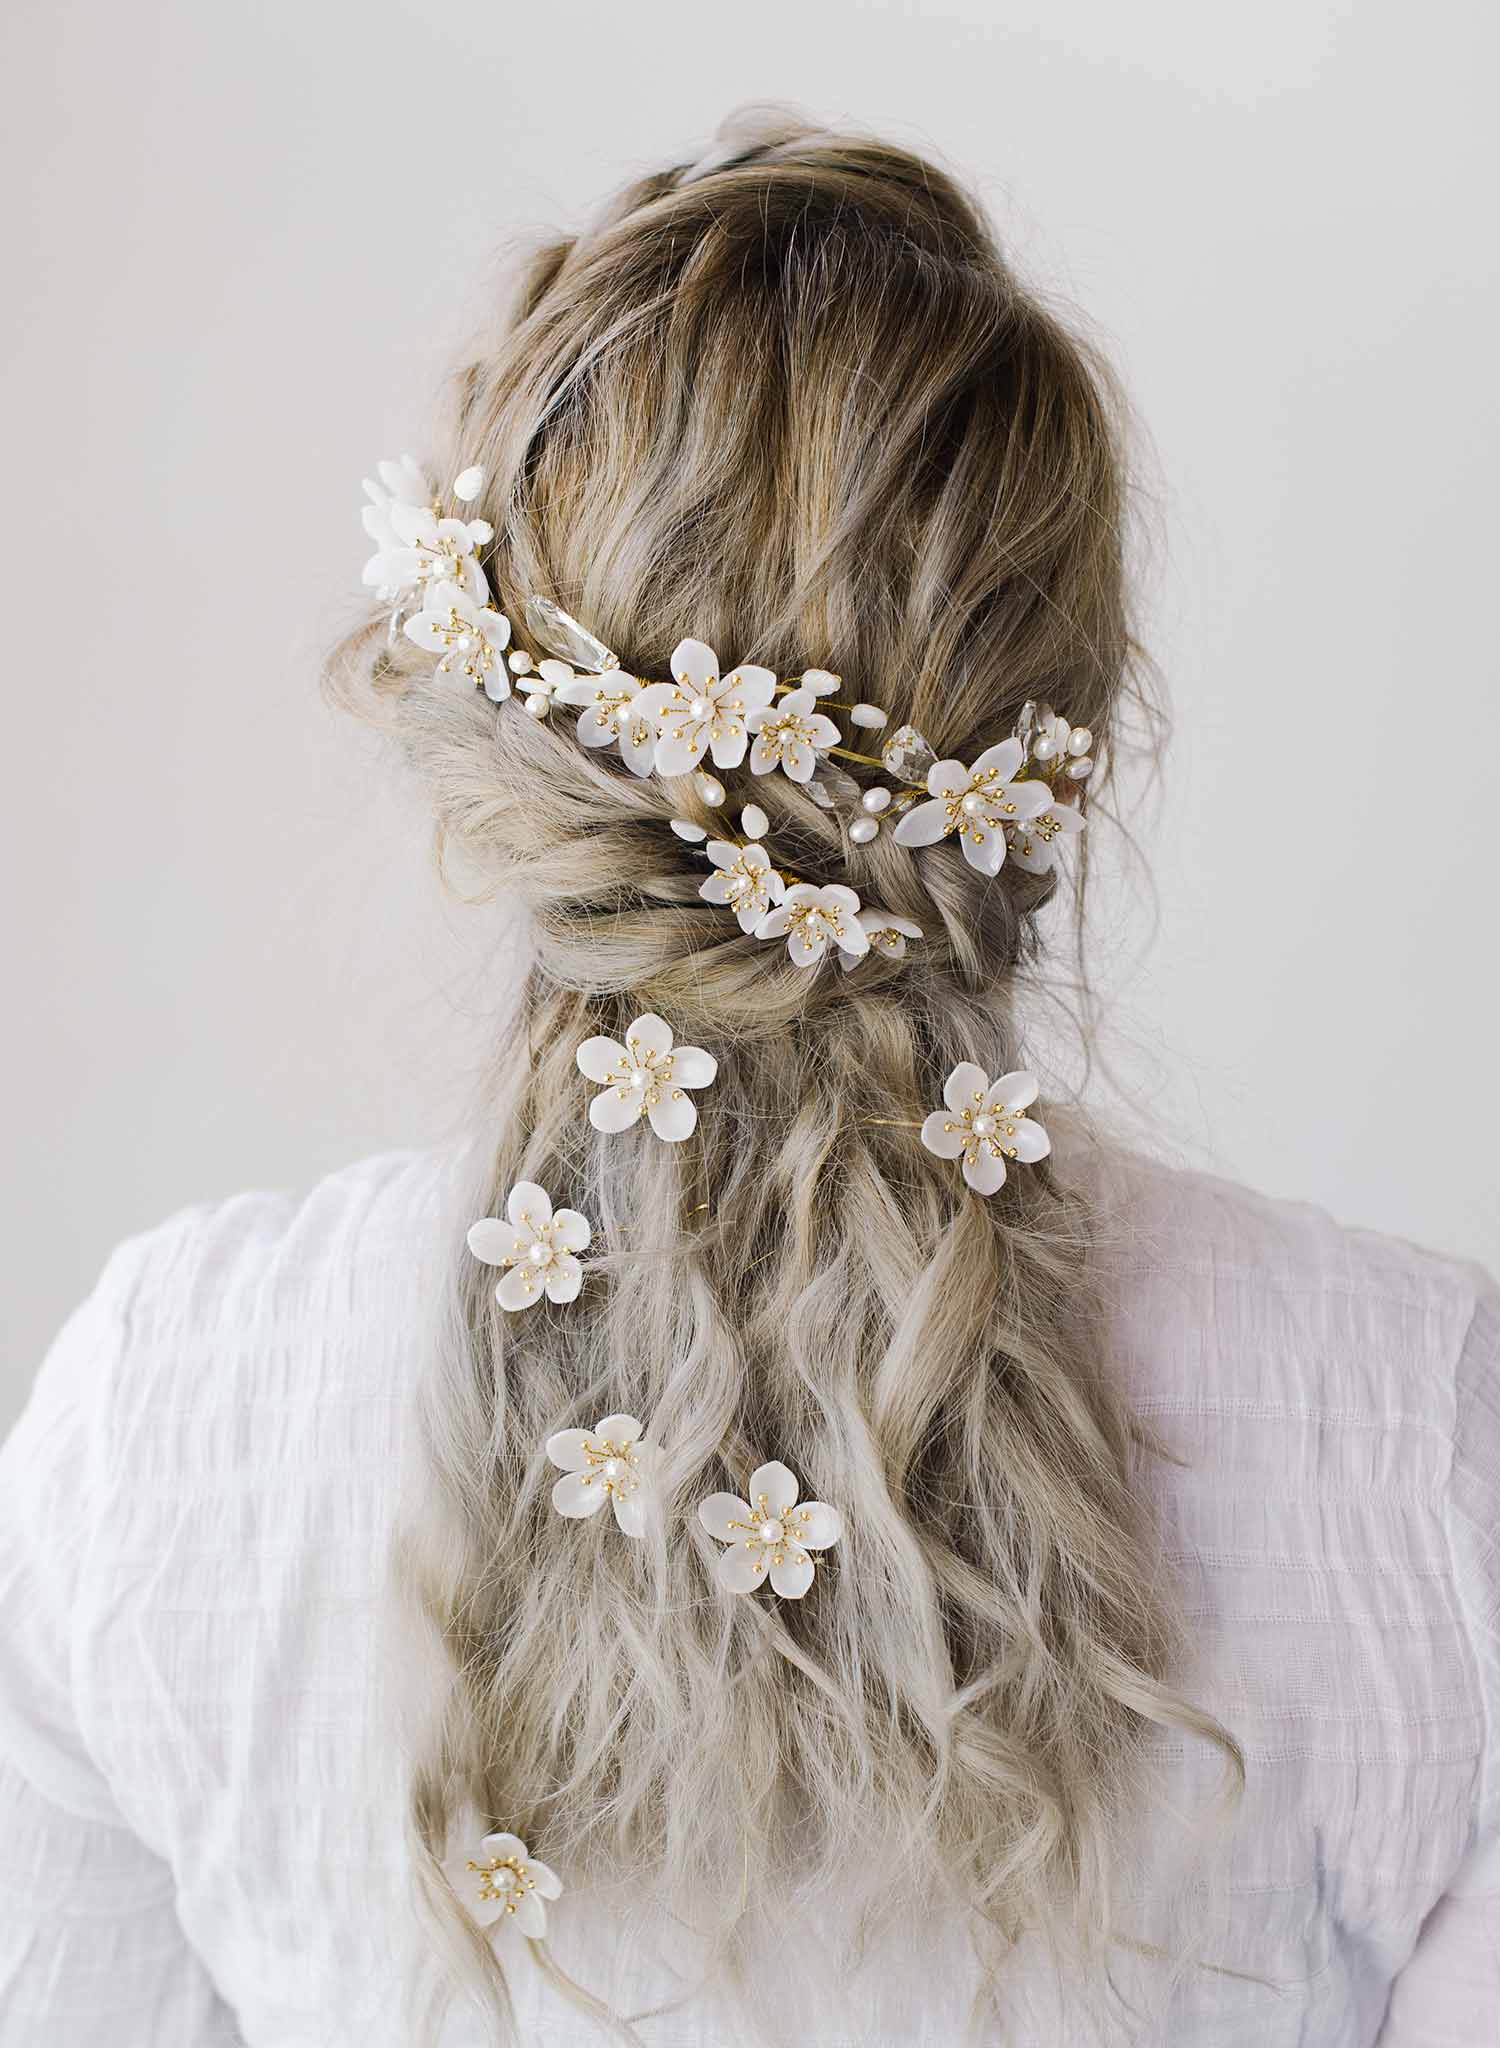 Bridal Hairpin Set by Twigs & Honey, Wedding Accessories - Pearlescent Flowers Bridal Hair Pin Set of 3 - Style #2077